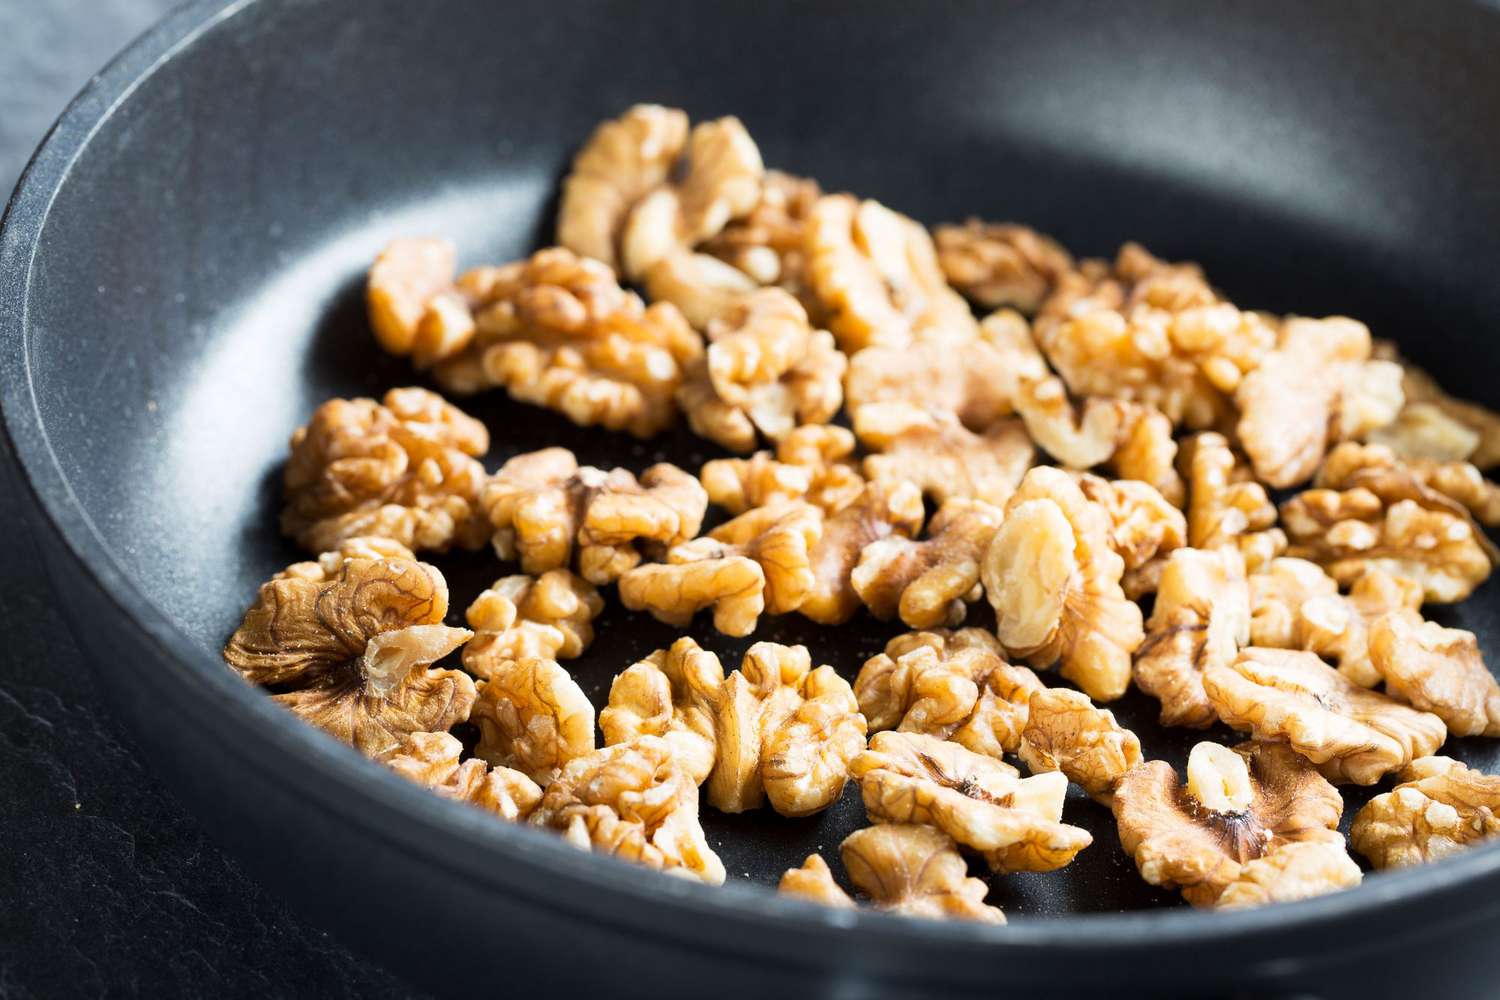 How To Store Toasted Walnuts